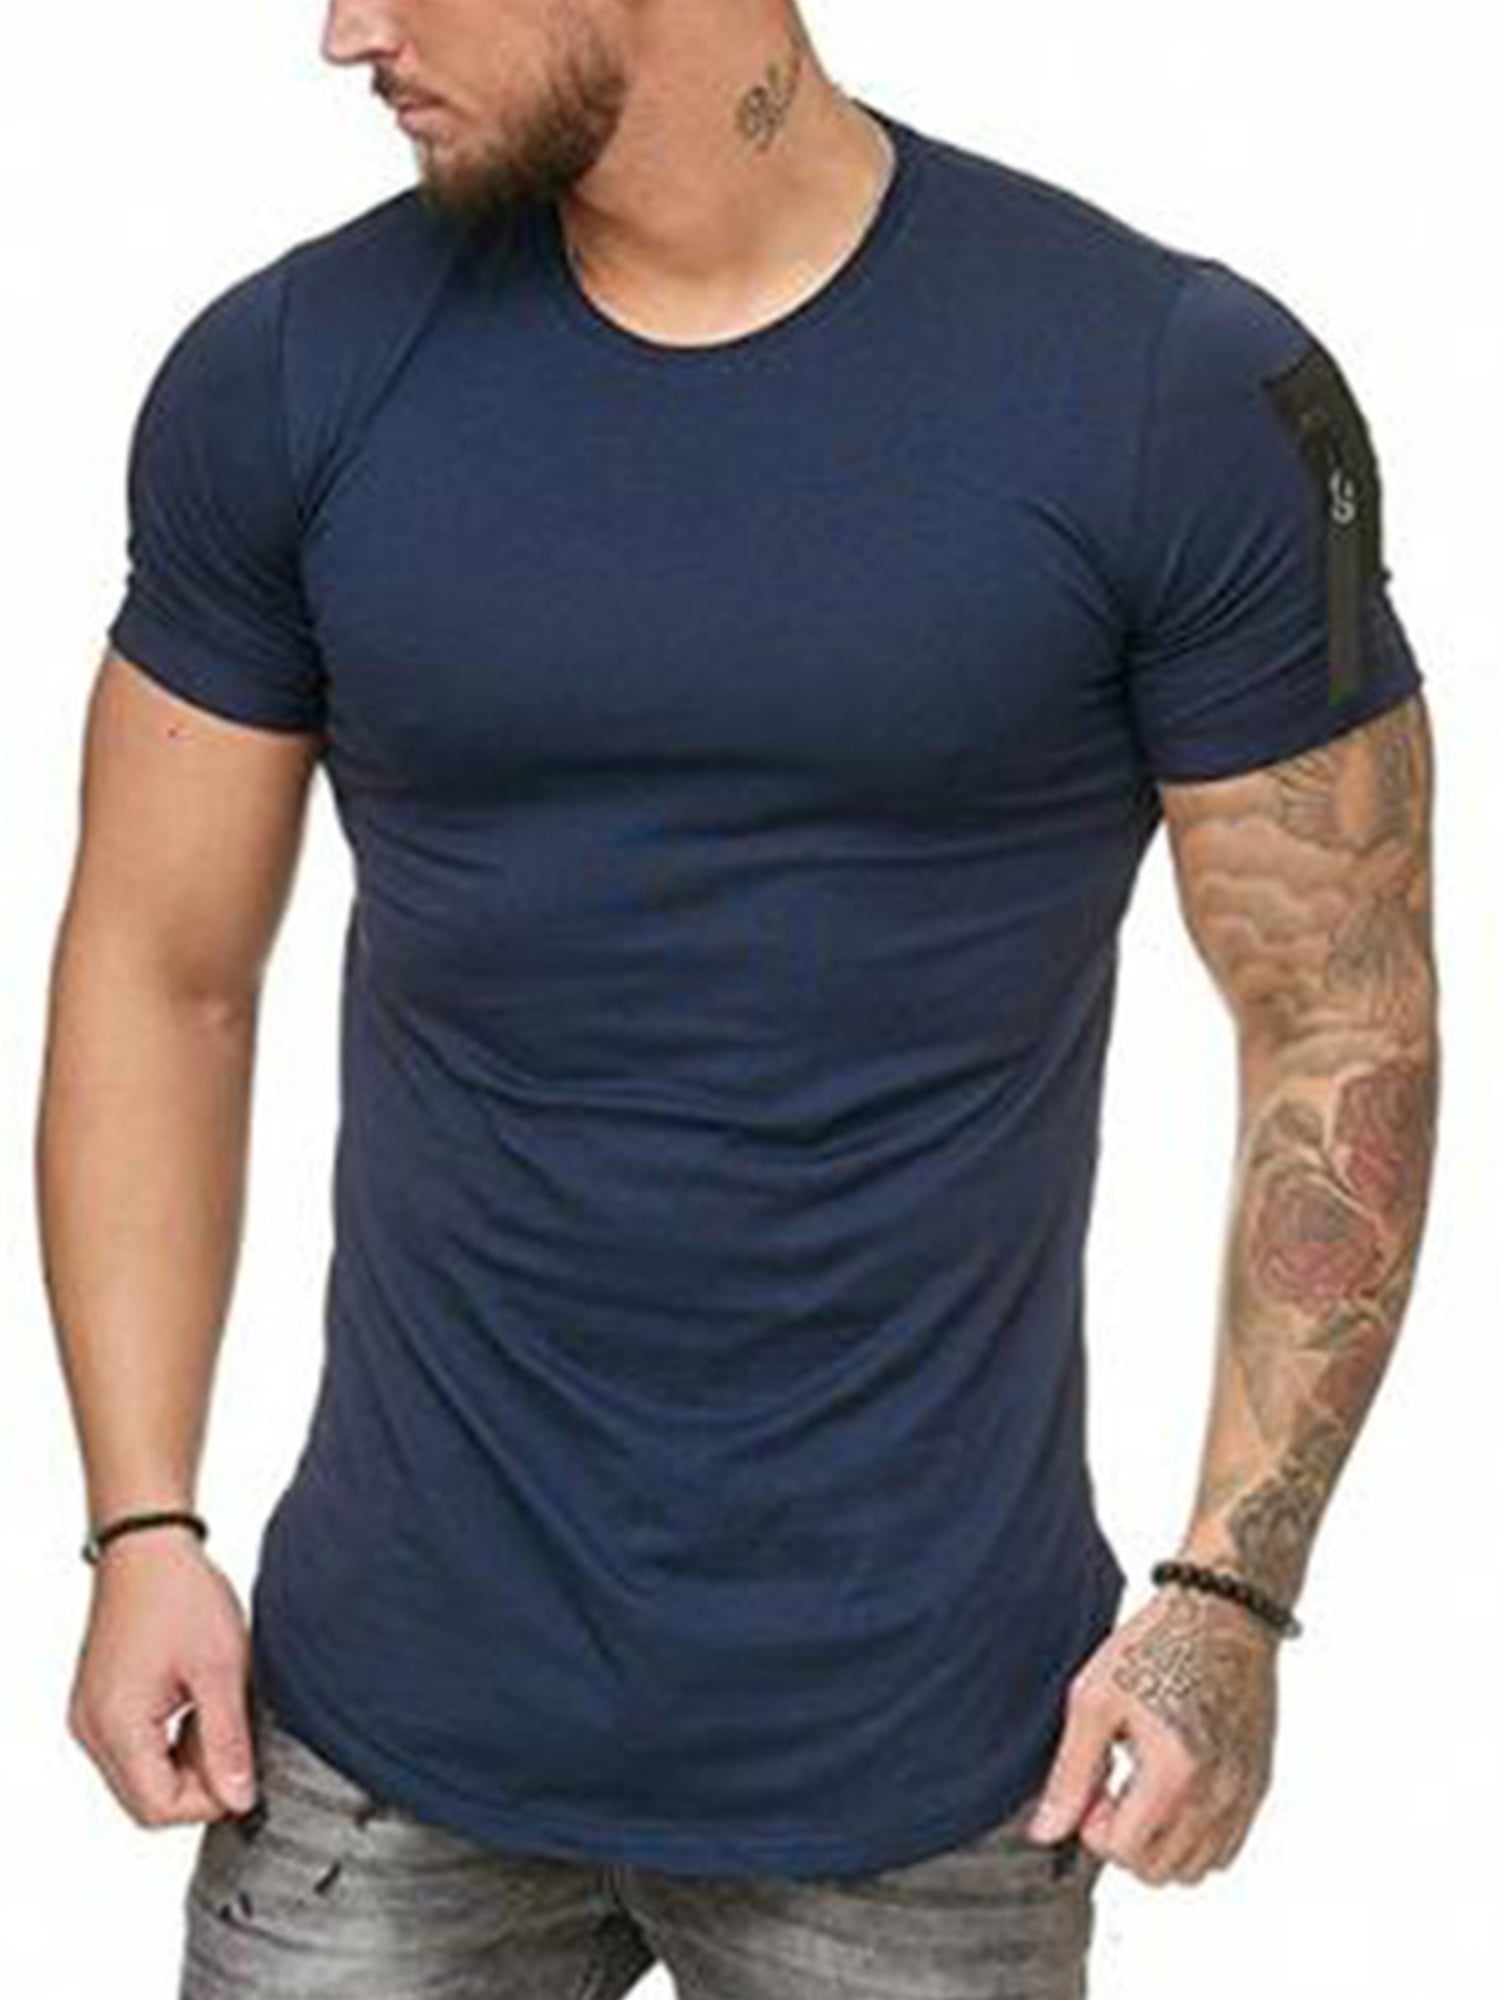 CRYYU Men Plain Long Sleeve Pullover Muscle Slim Fit Casual Round Neck Tshirt